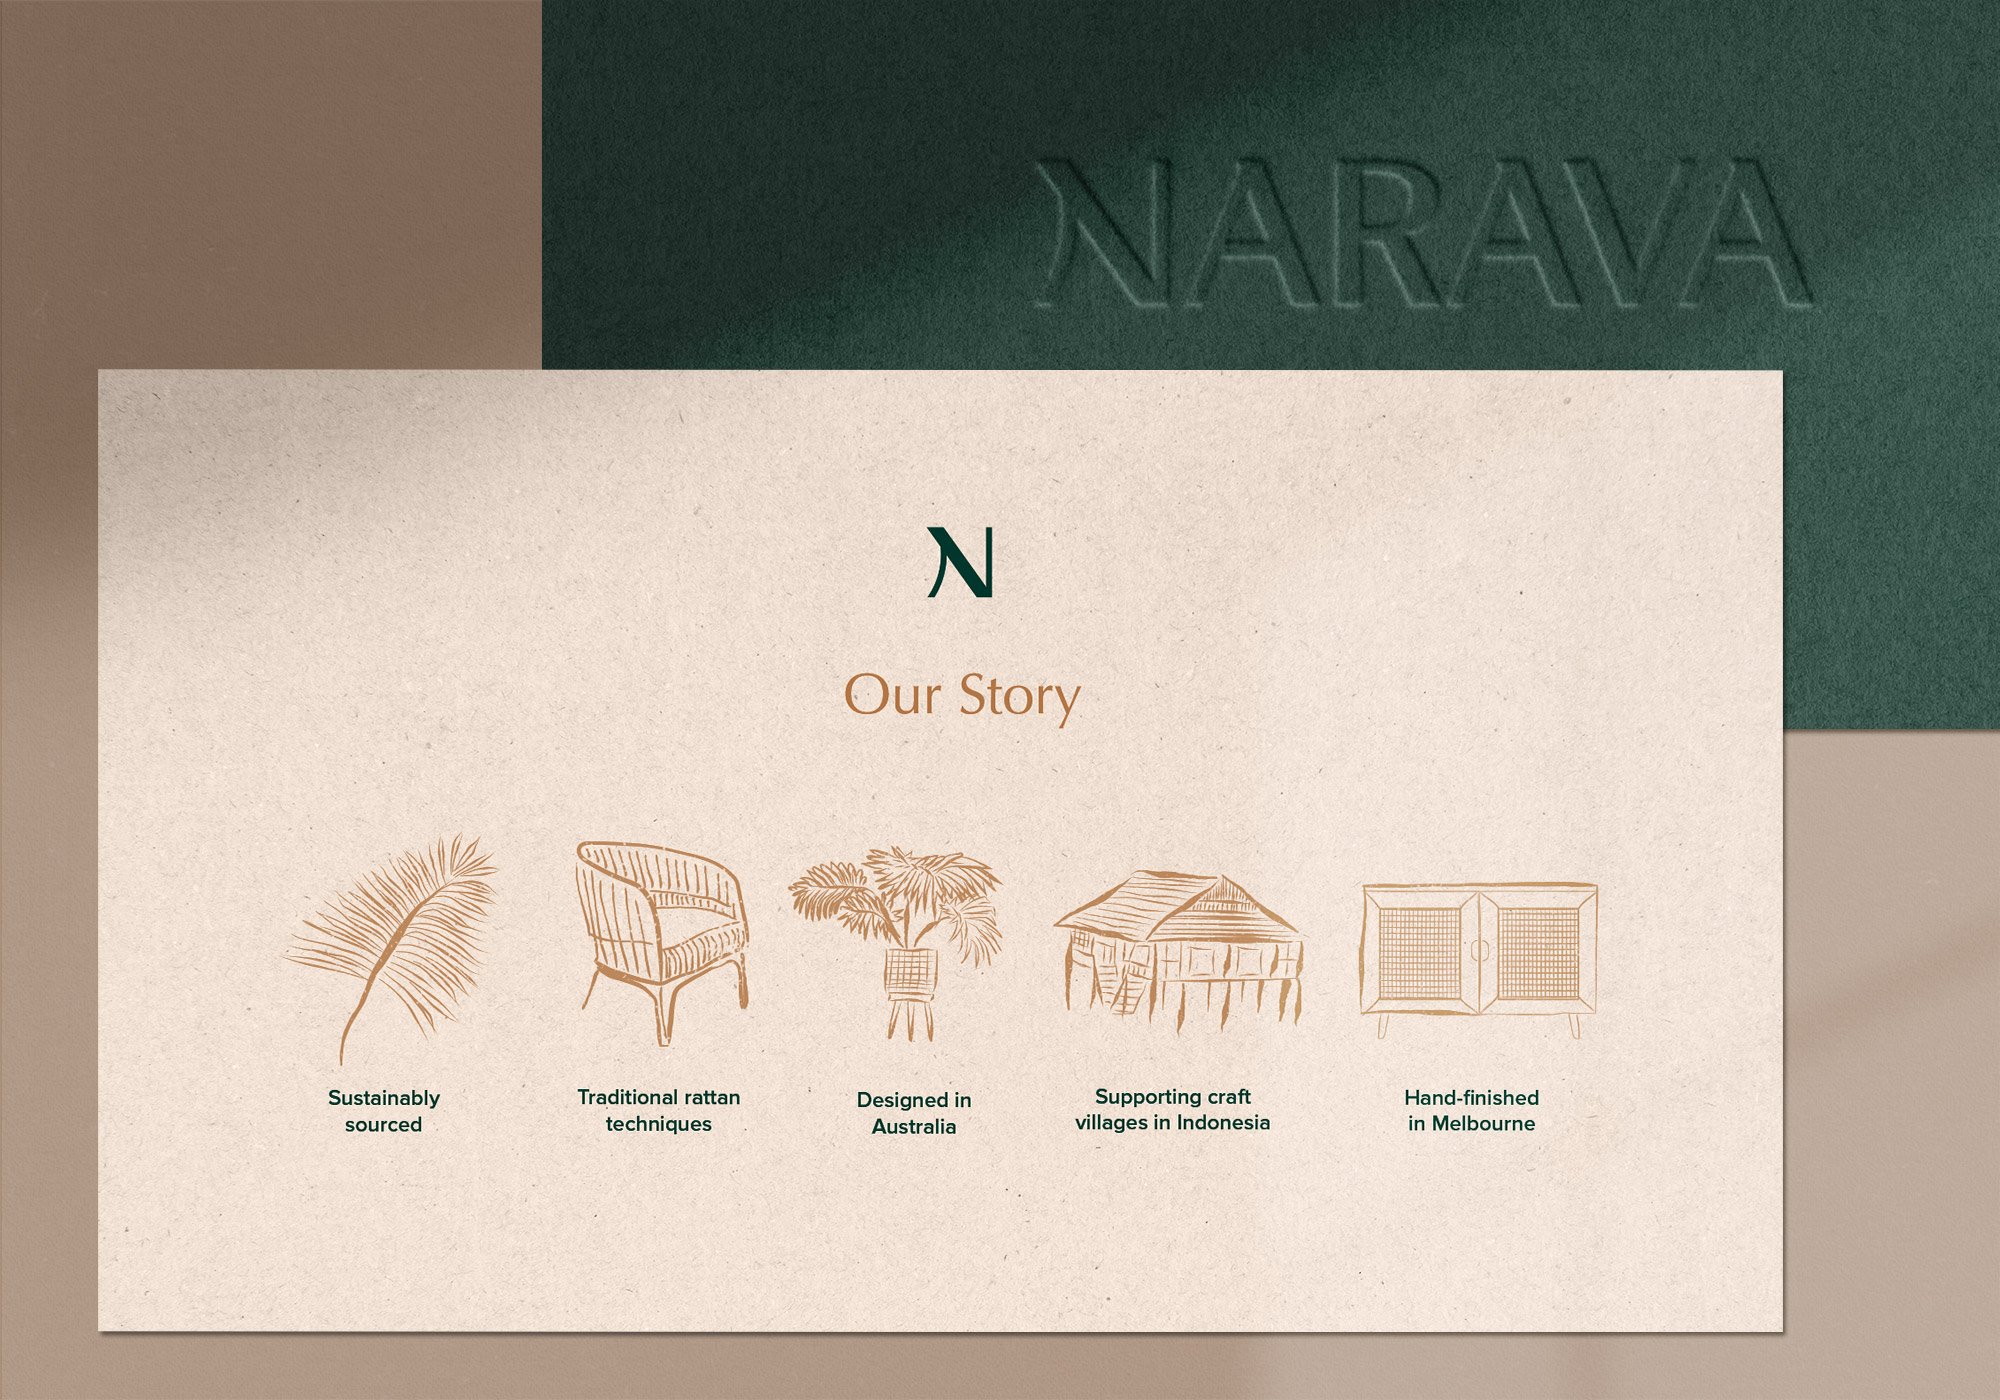 Narava printed flyer with illustrations